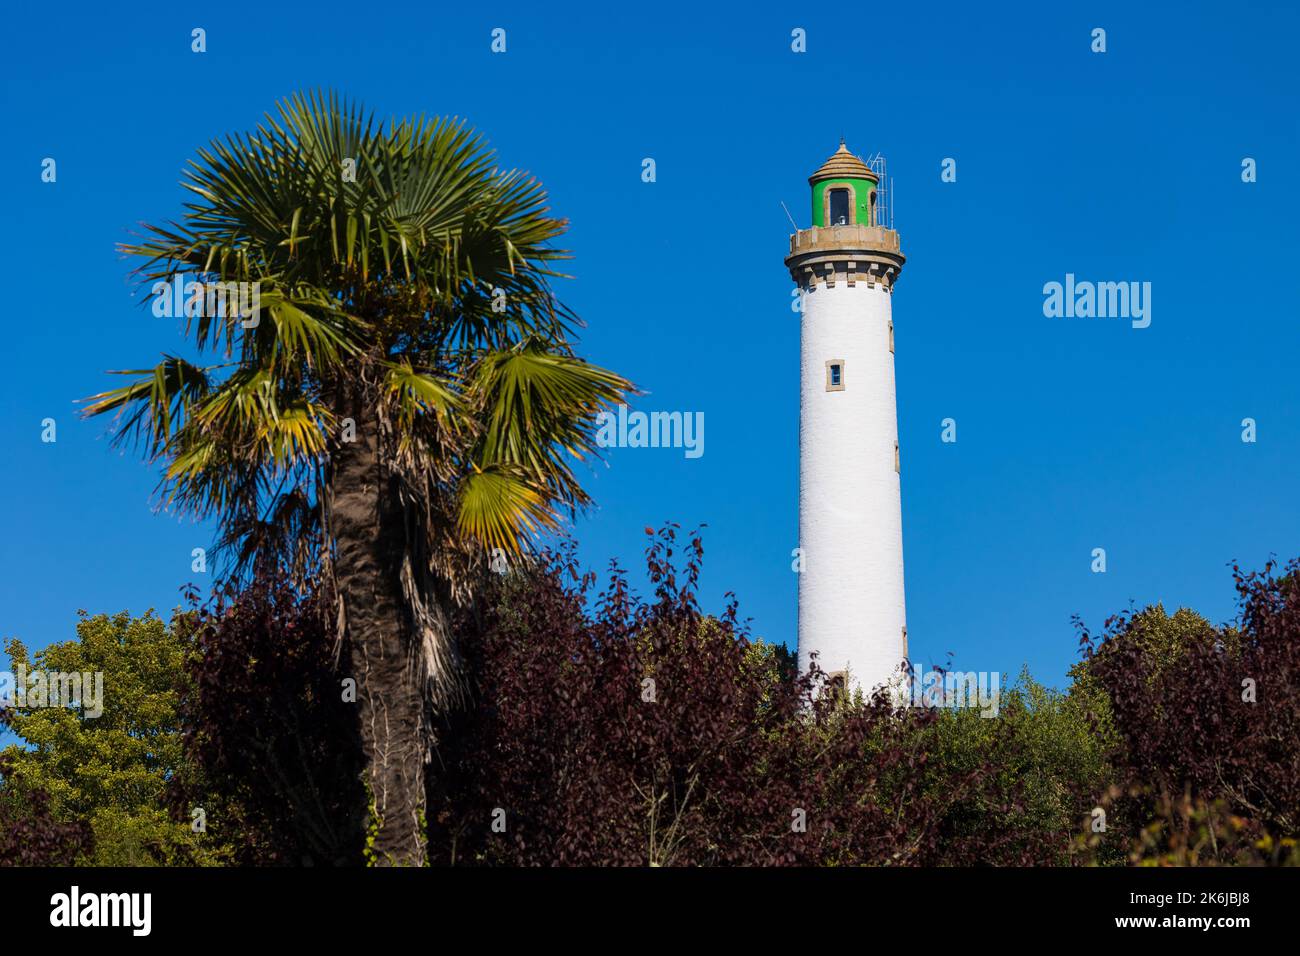 The Pyramide lighthouse in the Benodet port, Brittany, France Stock Photo